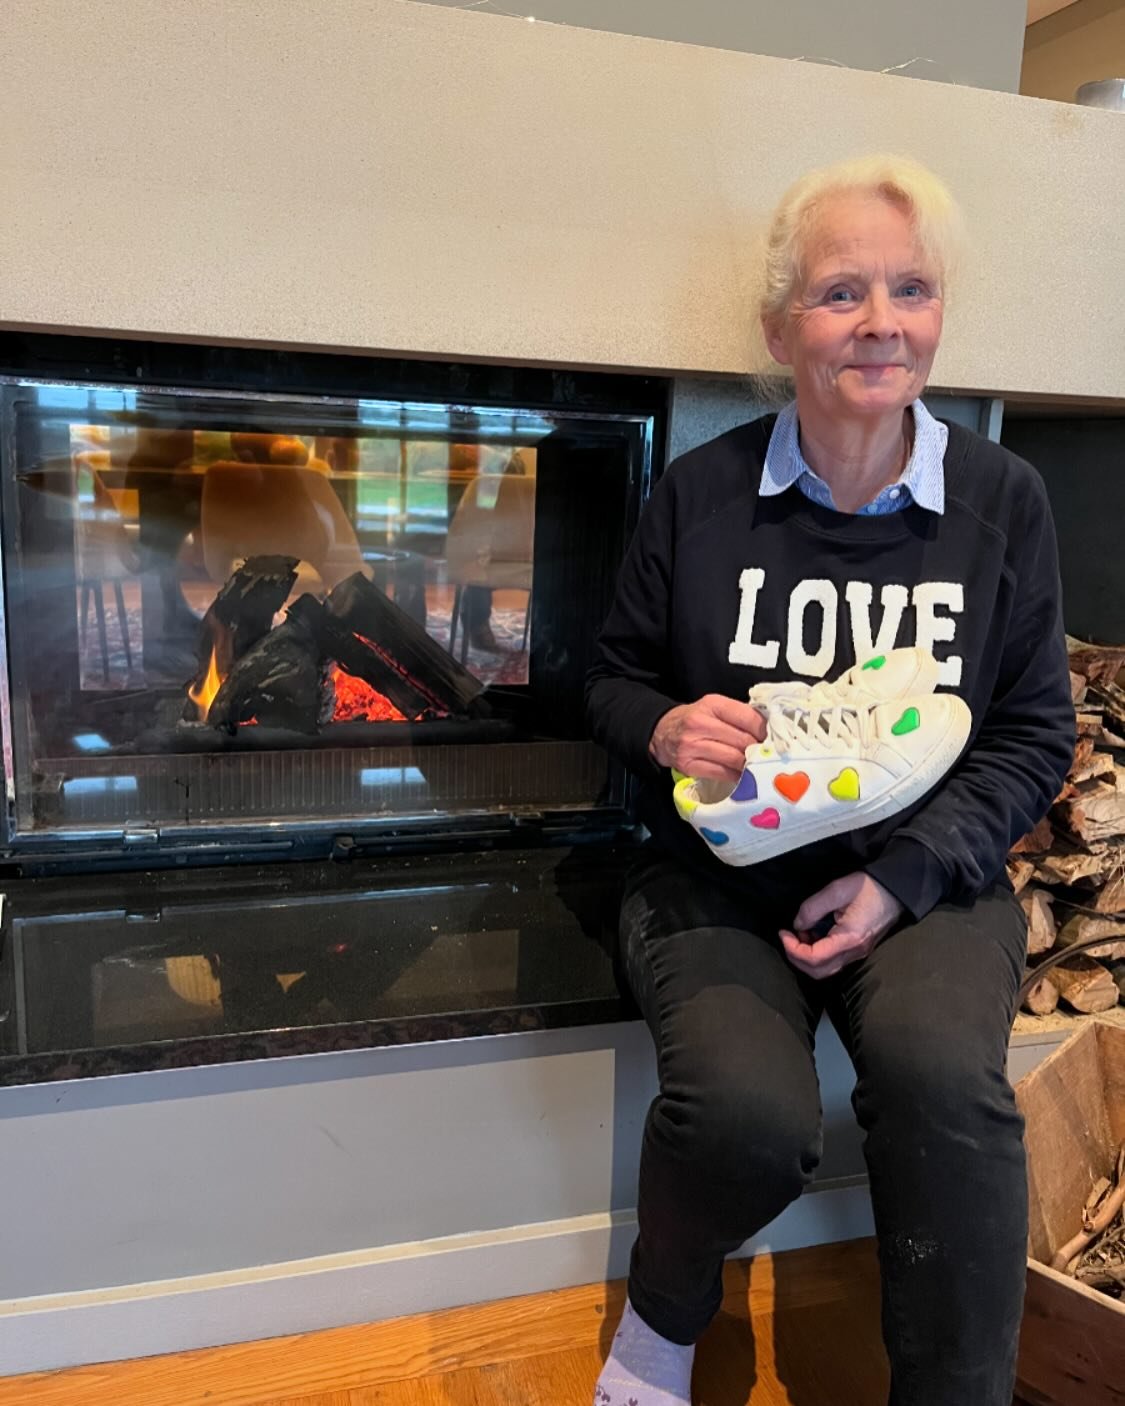 💜 I was about to abandon the fire and brave the rain and then I wondered &hellip; even for a romance author, is wearing Love on your jumper and Hearts on your sneakers over egging the pudding? Then again, the jumper was a gift from my daughter and t